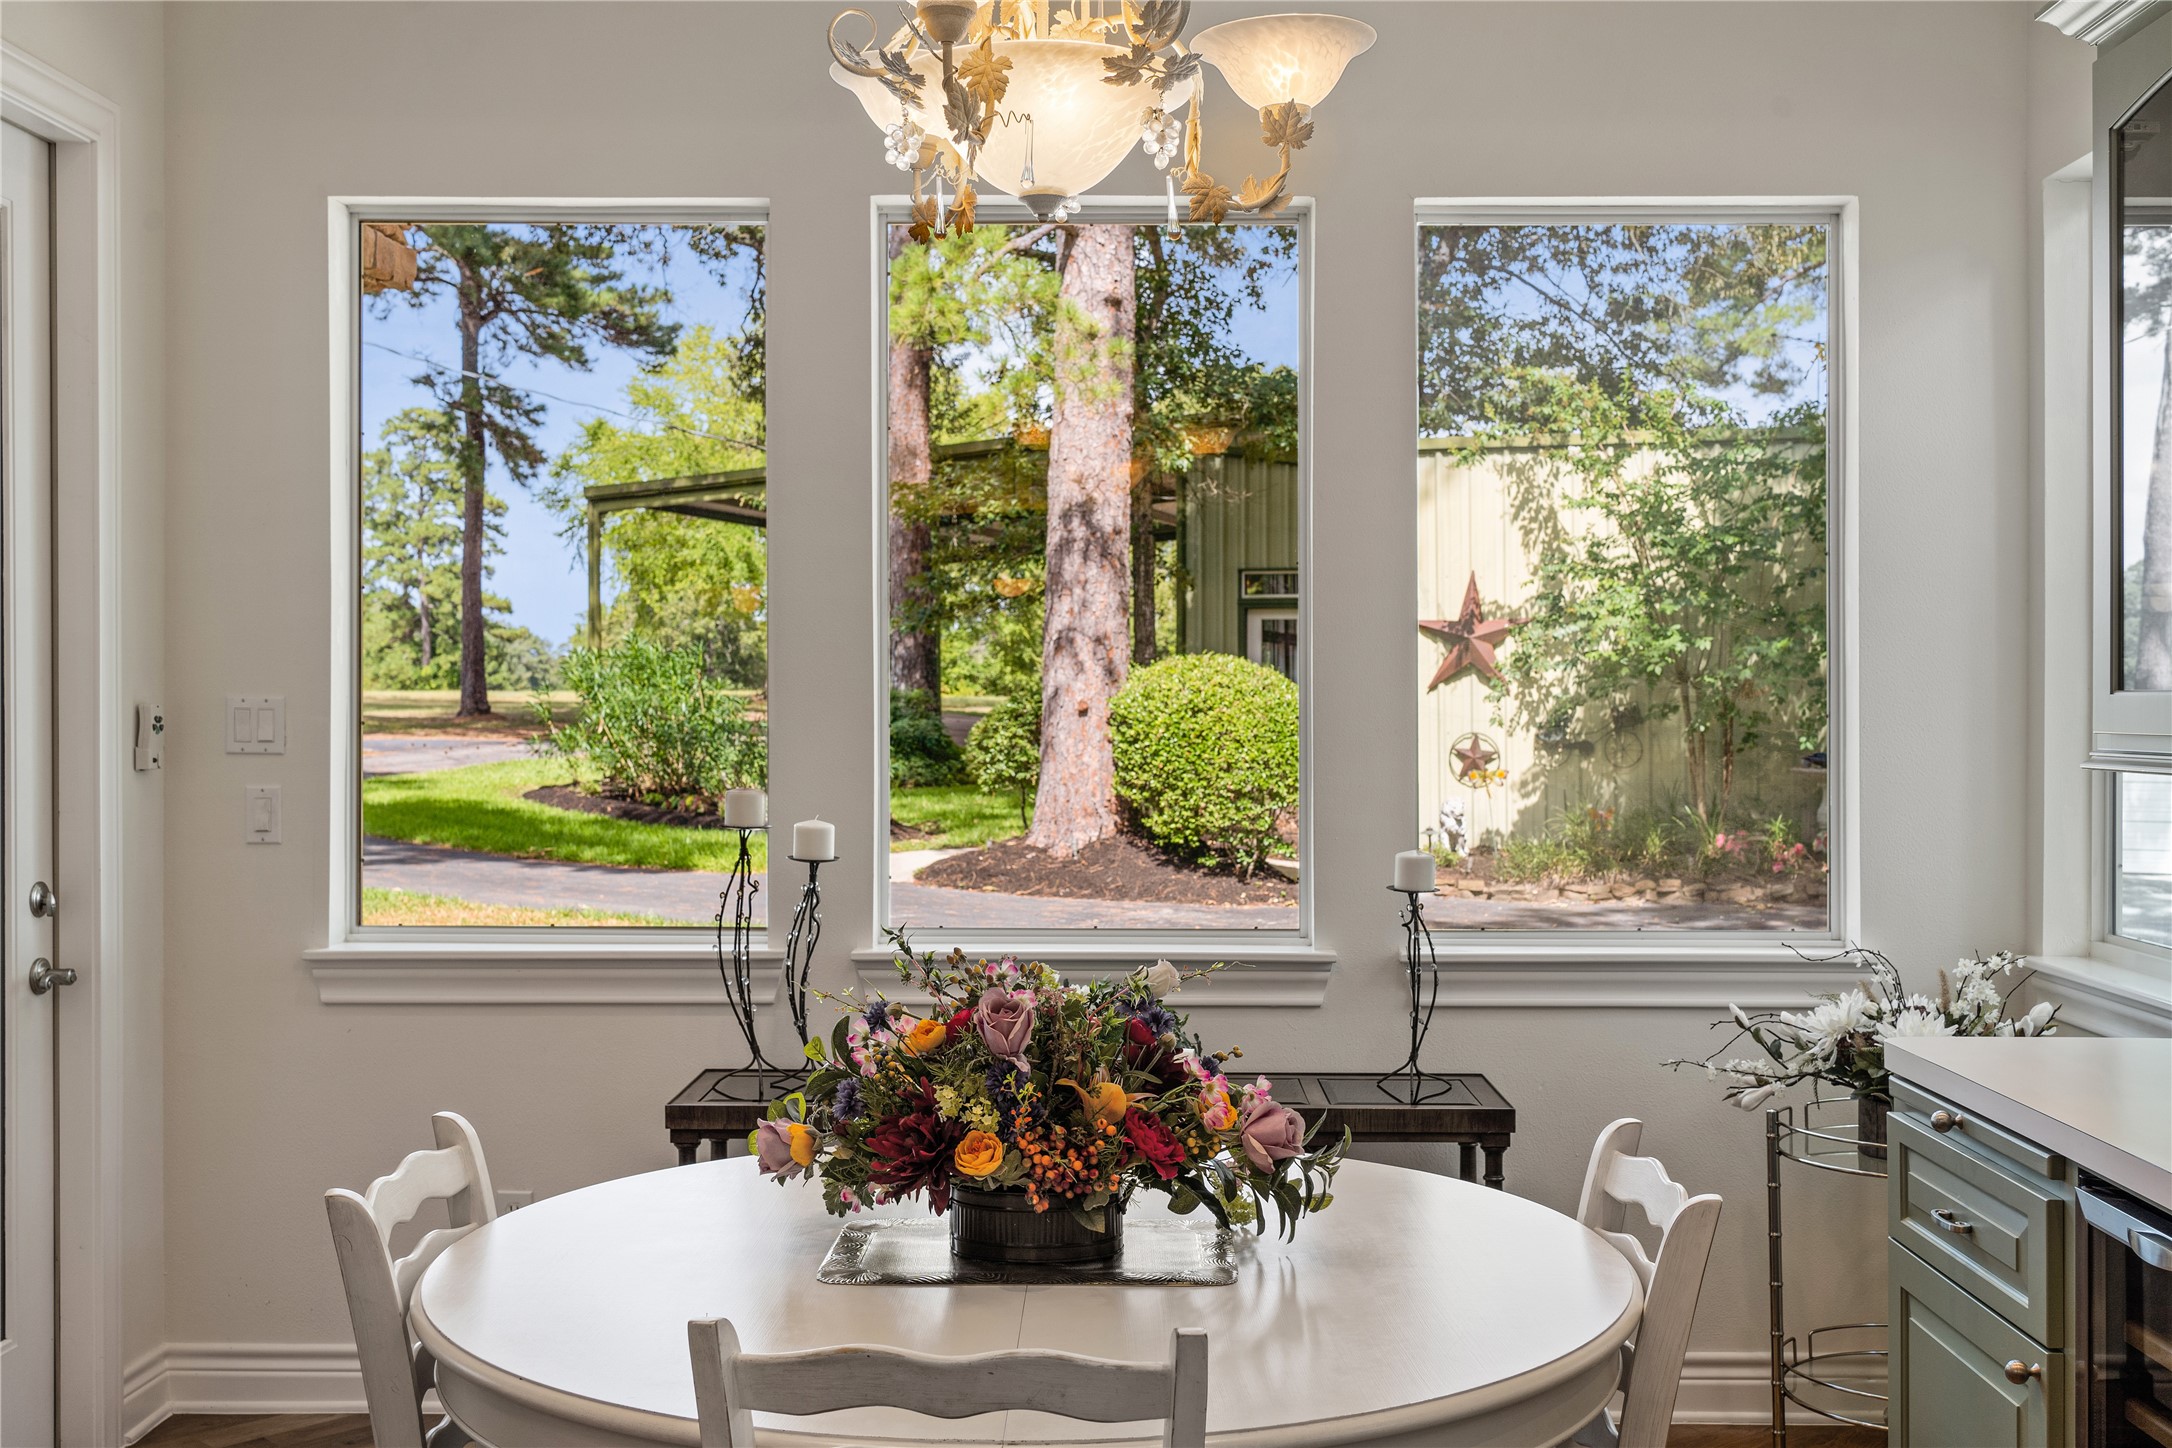 The dining room also overlooks the backyard and features a beverage station with a wine refrigerator.